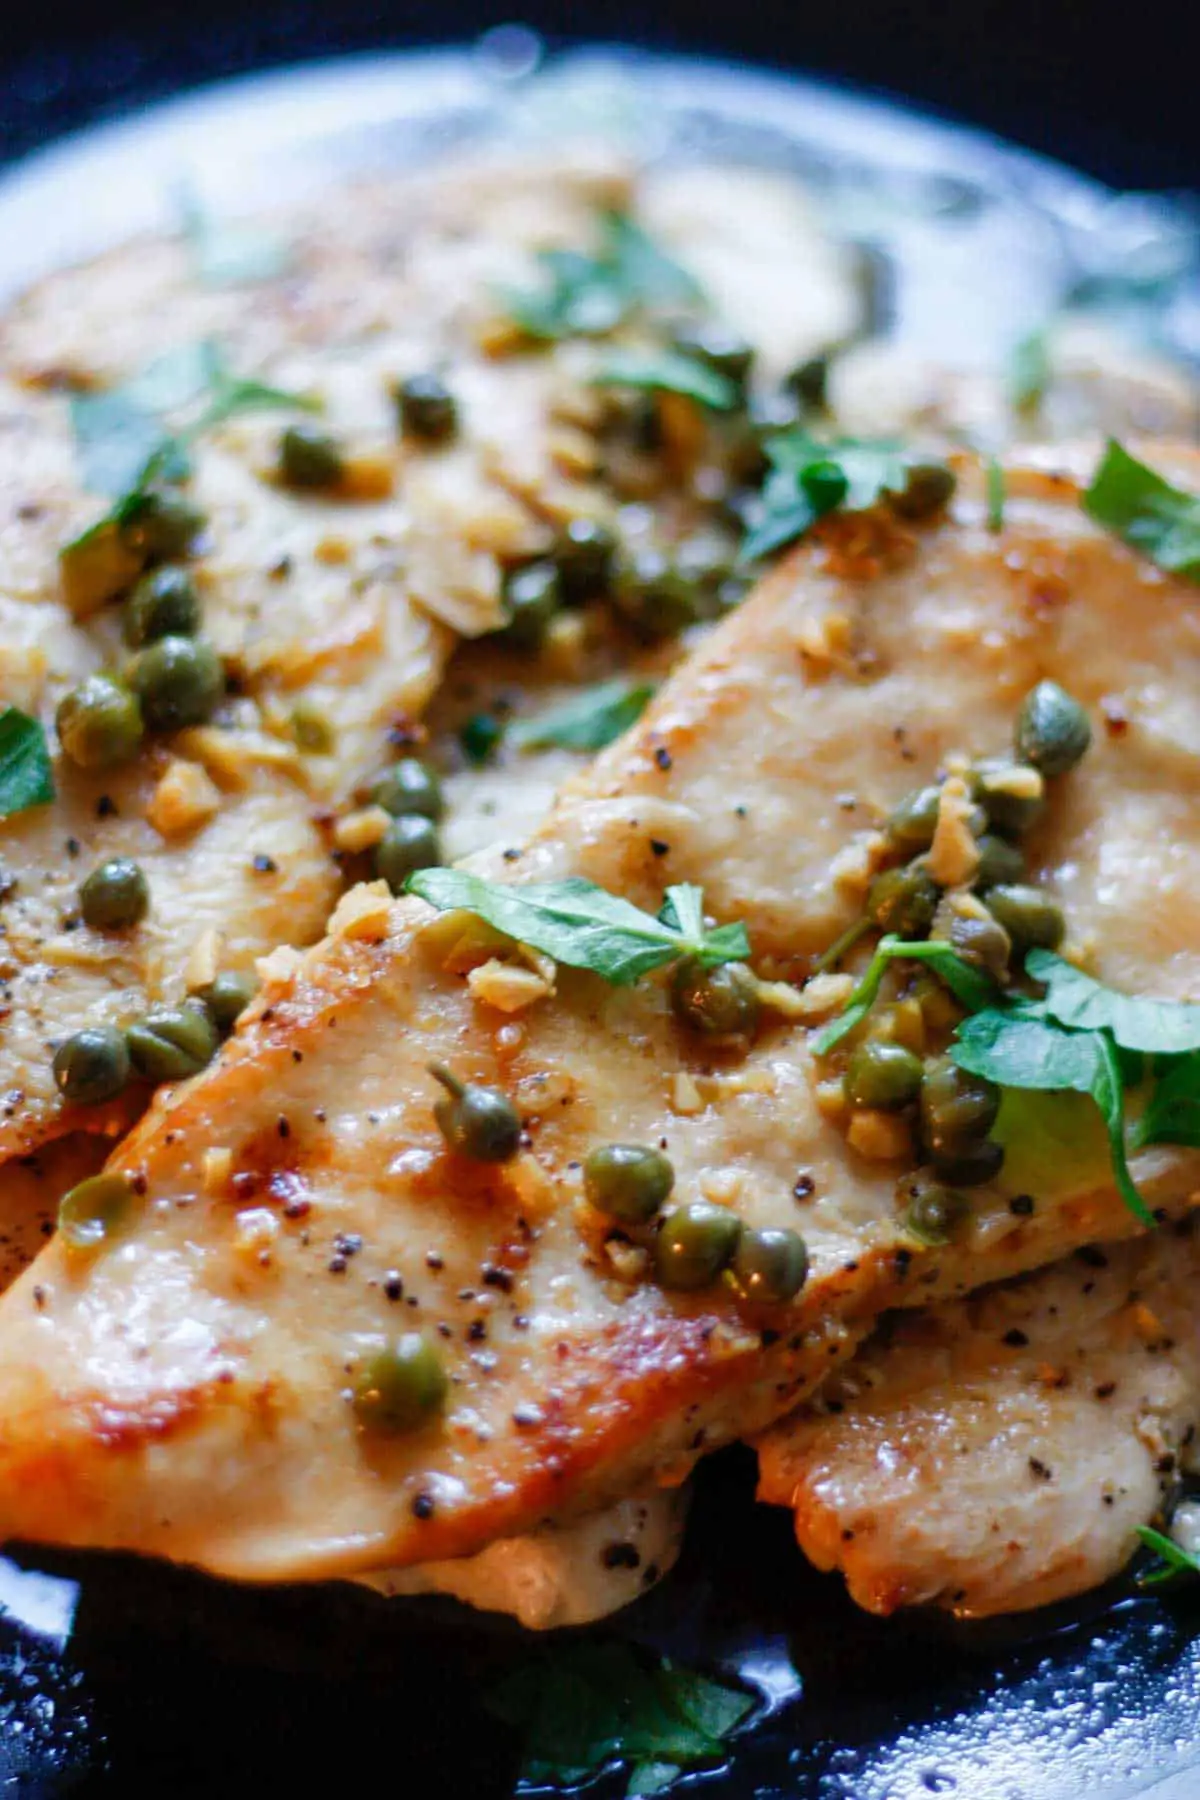 Chicken scallopini or thin slices of chicken cooked and garnished with Italian parsley with a sauce of capers, garlic, lemon juice, chicken broth and butter poured over the chicken.